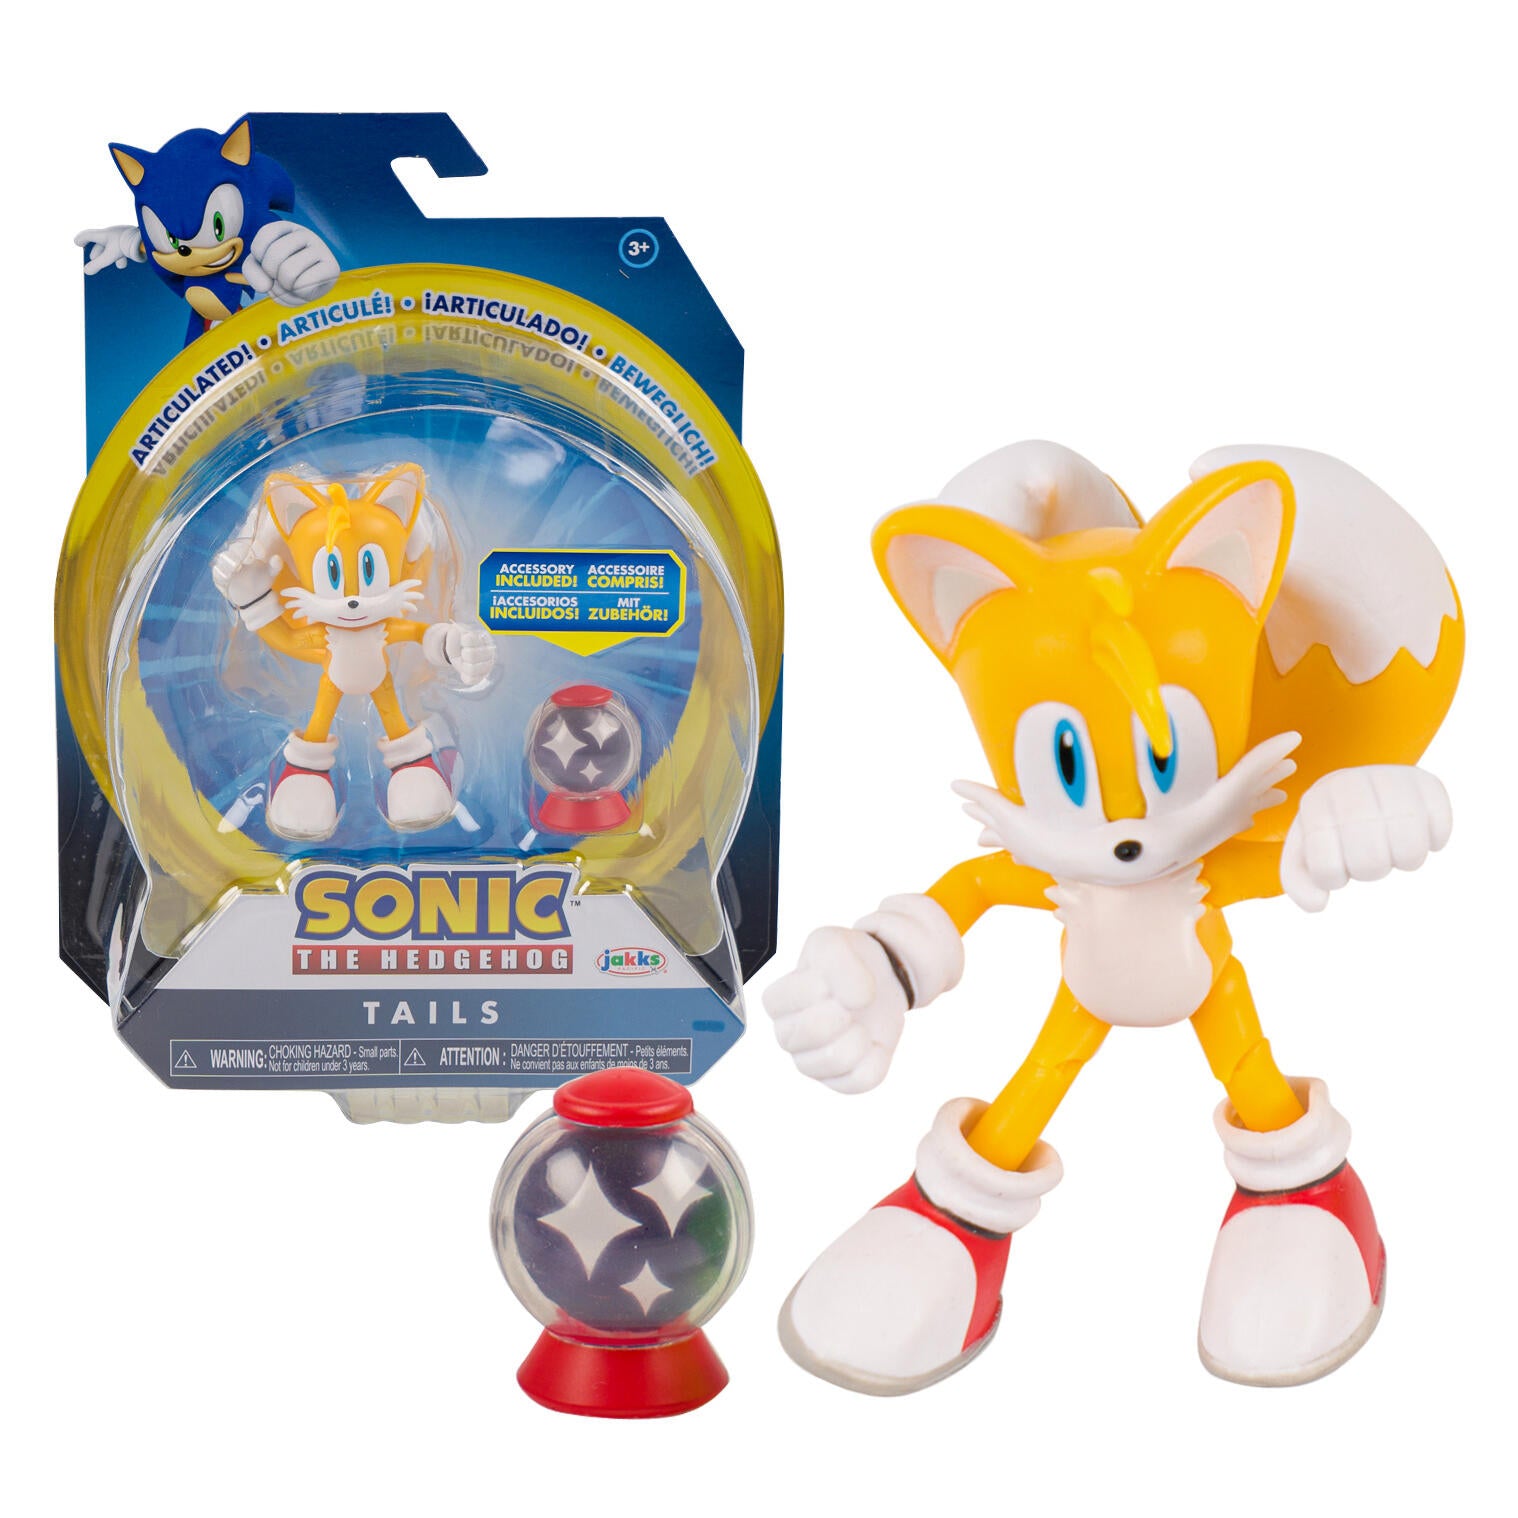 SONIC THE HEDGEHOG TAILS ACTION FIGURE 4"